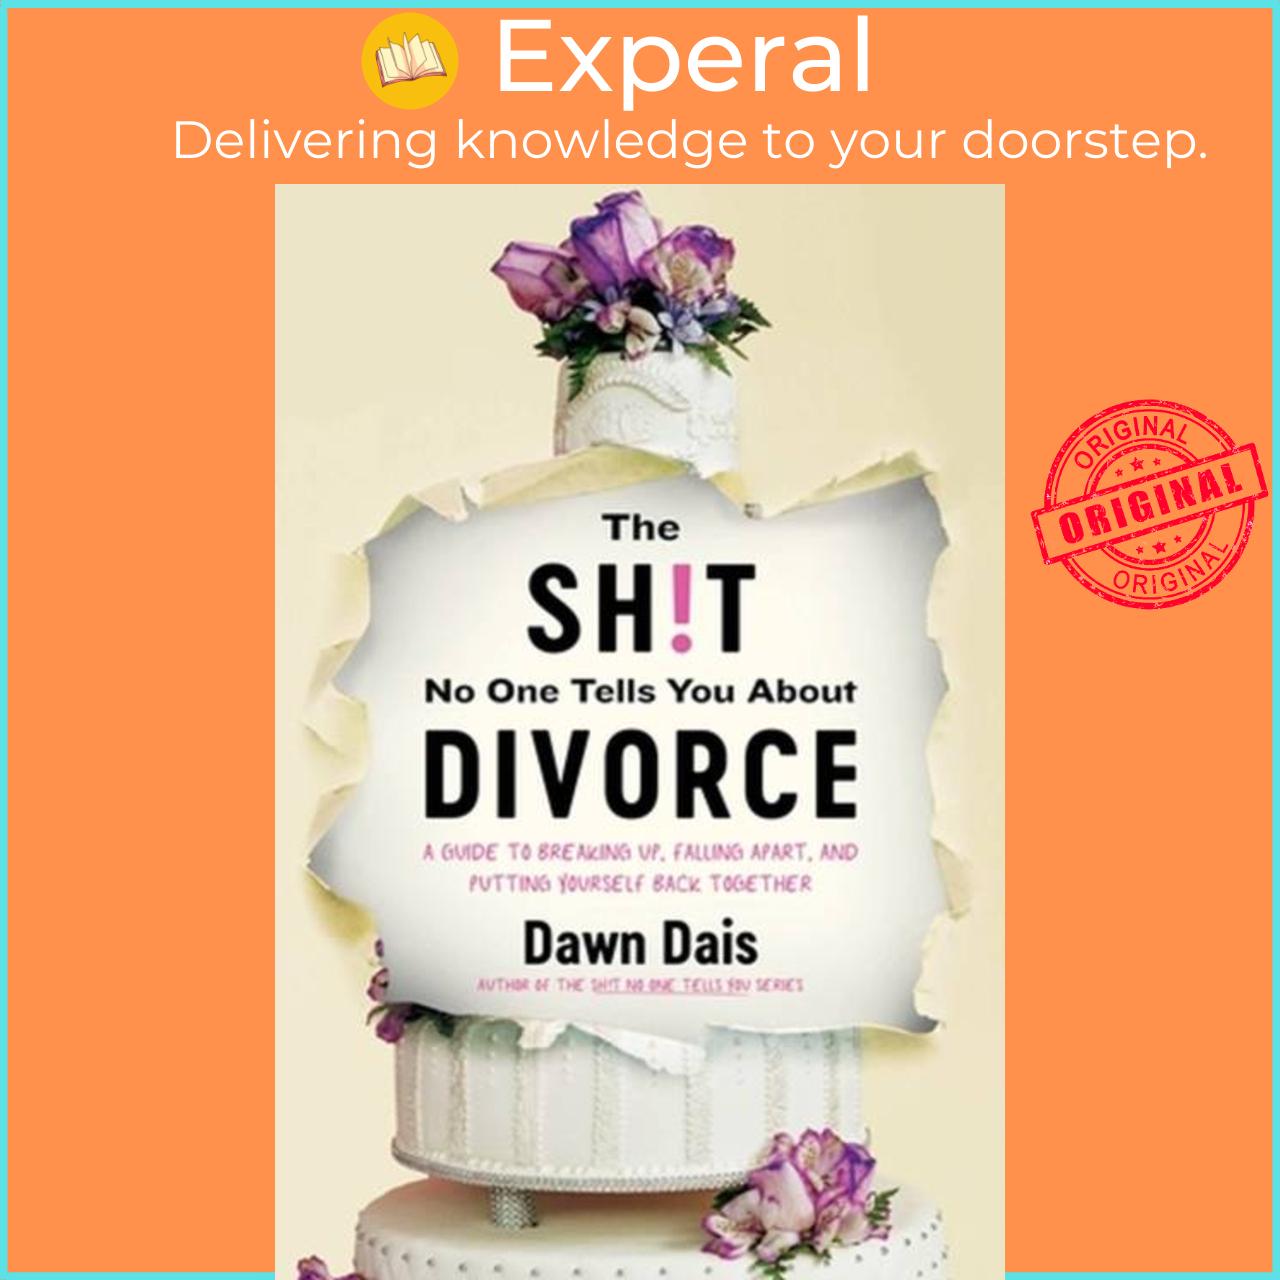 Sách - The Sh!t No One Tells You About Divorce - A Guide to Breaking Up, Falling Ap by Dawn Dais (UK edition, paperback)